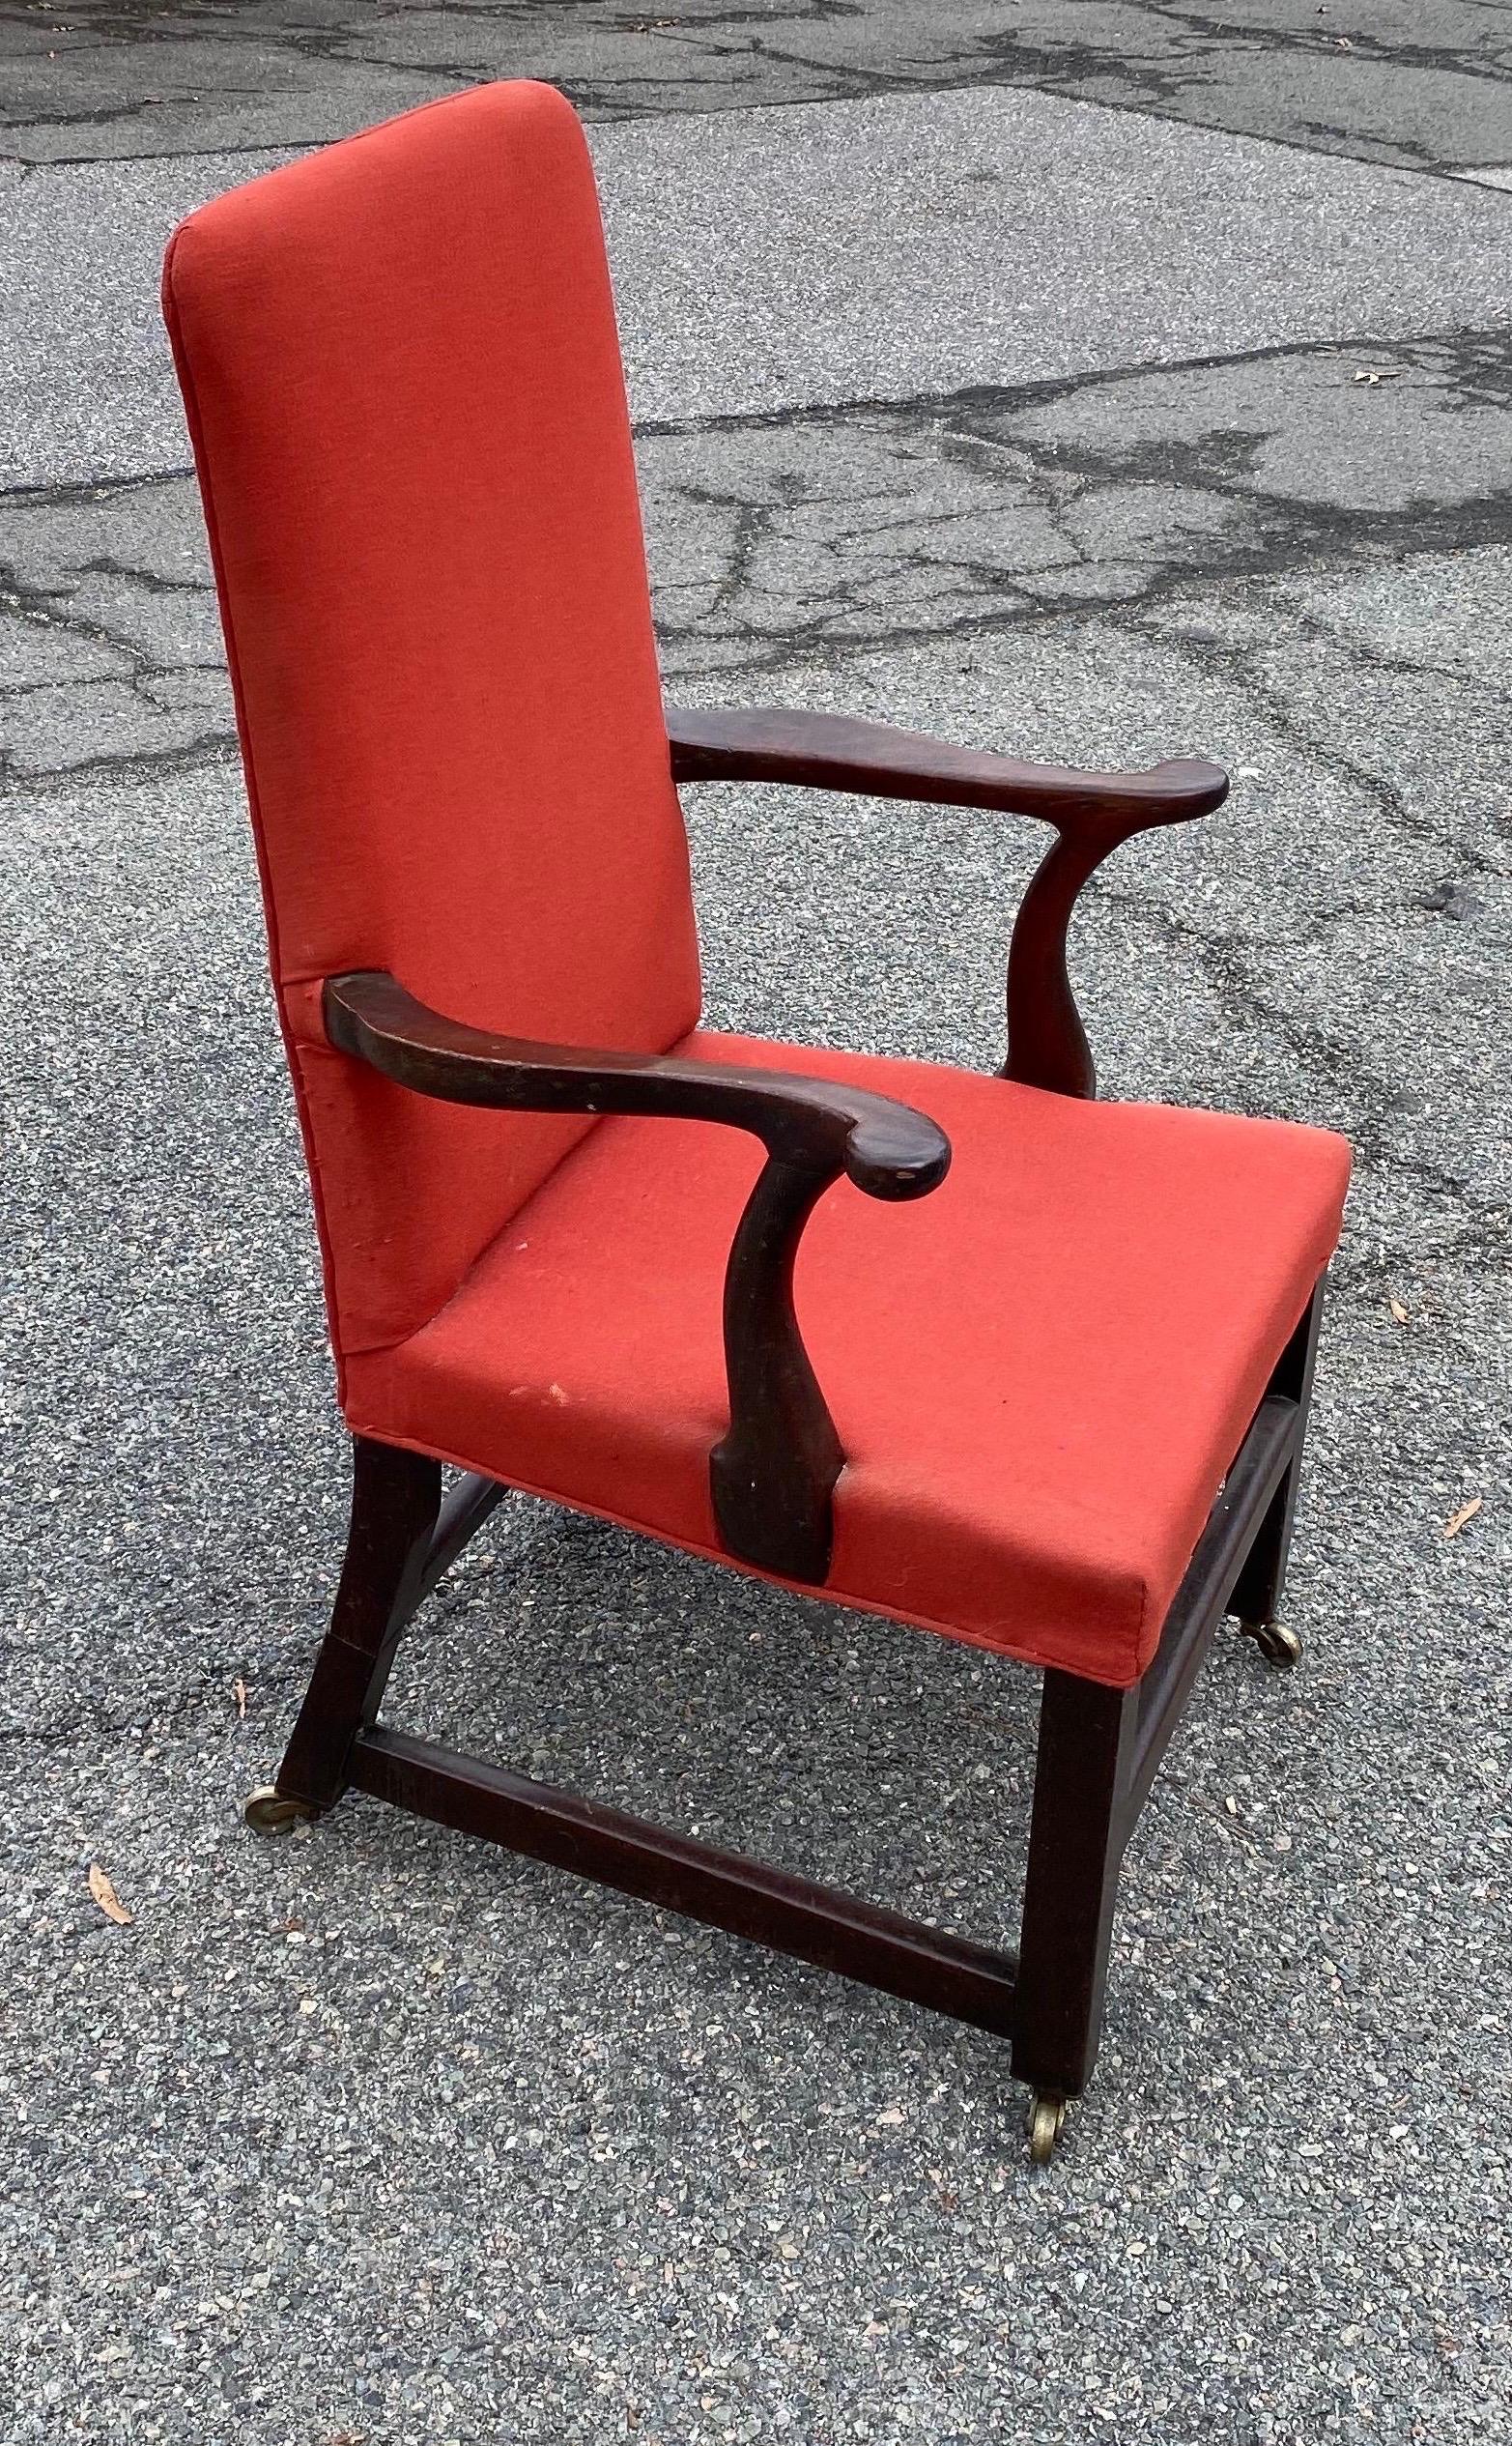 Lovely 19th century English mahogany armchair in red upholstery and castors. Chair has charming old restorations to the back legs, appearing as cuffs.